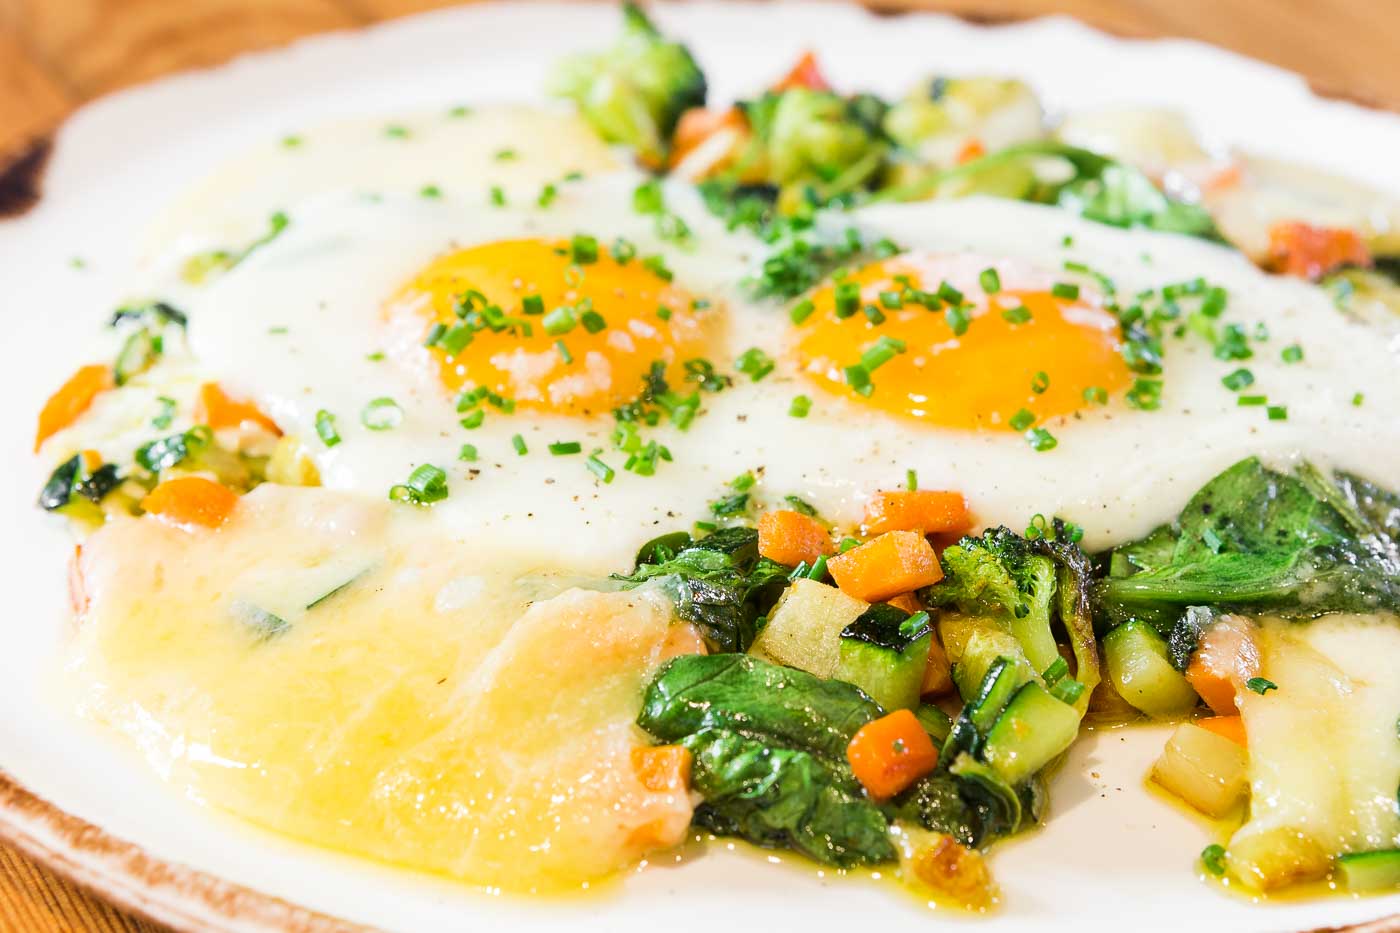 Egg with cheese and vegetables